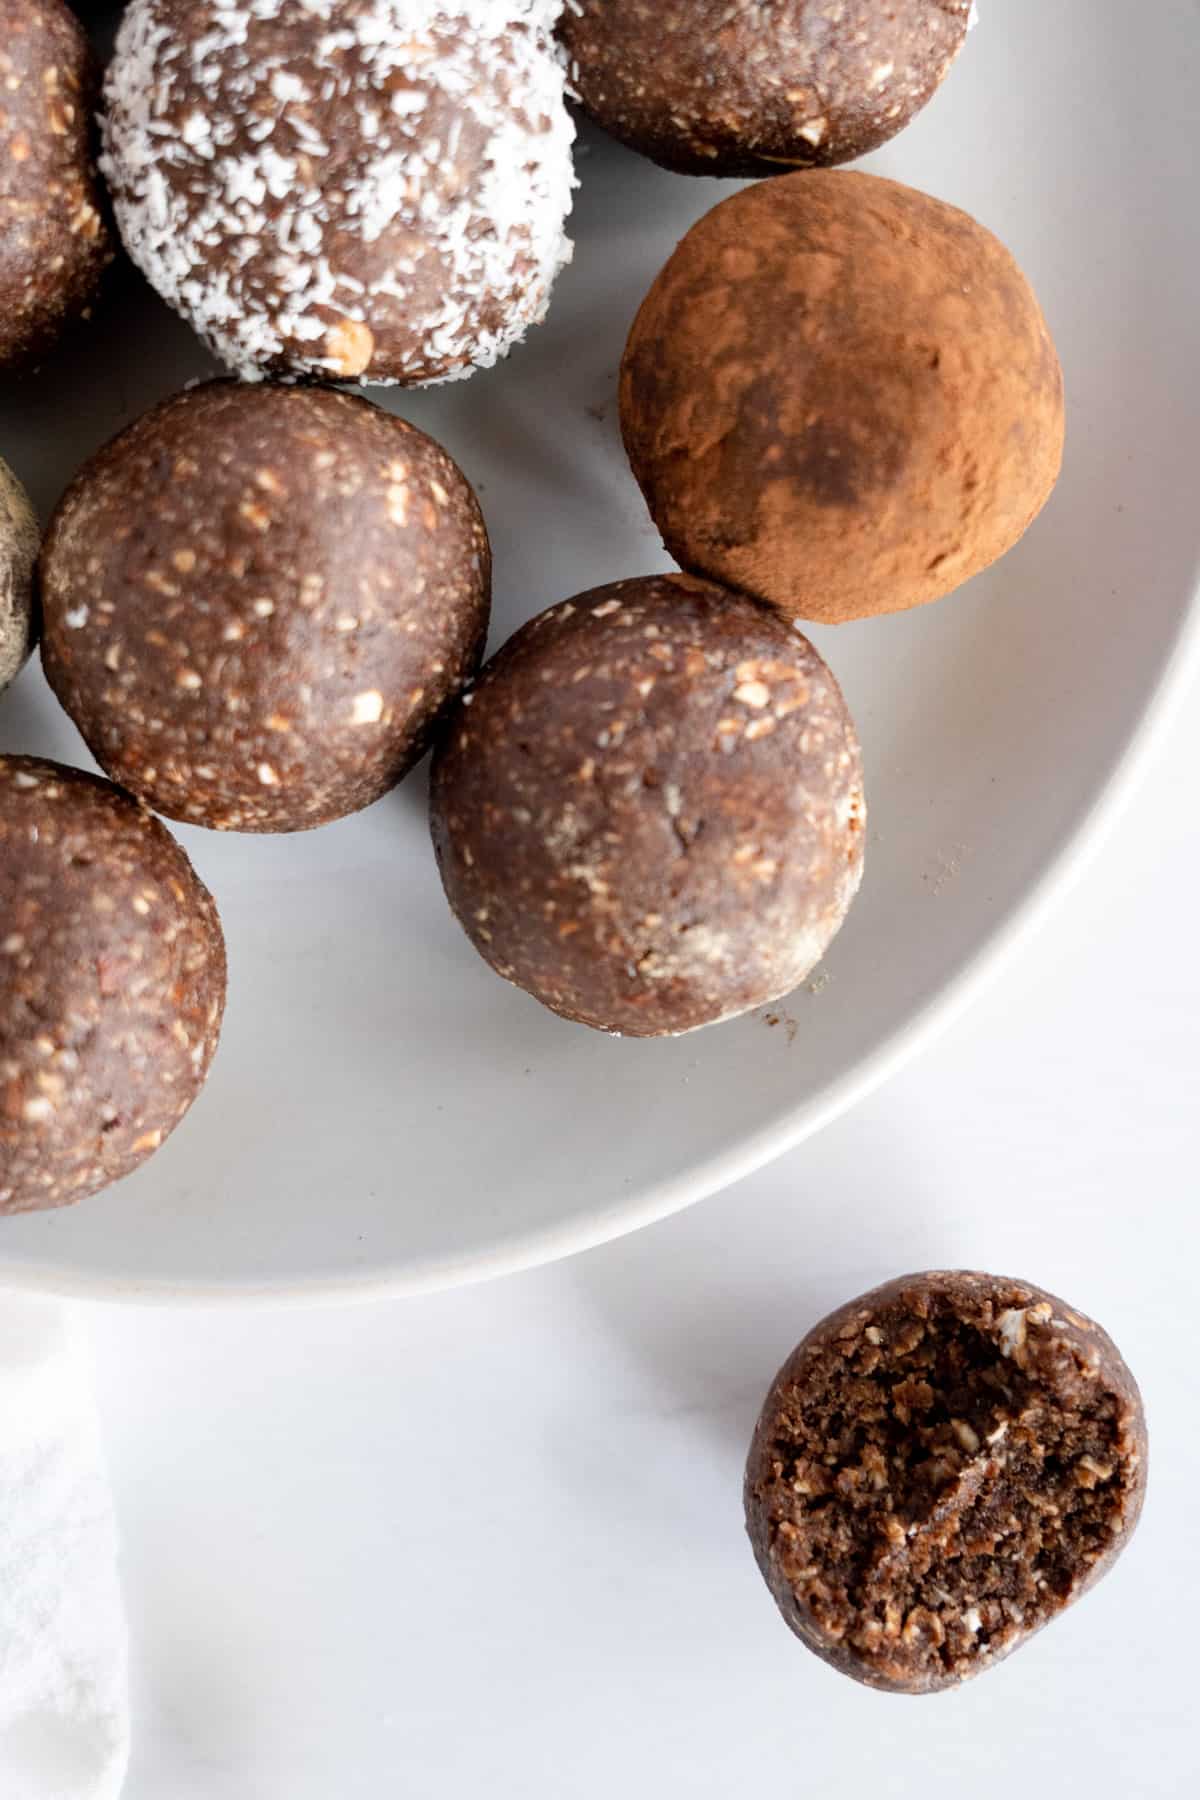 brown chocolate balls on a white plate with one on the side and a bit missing from it